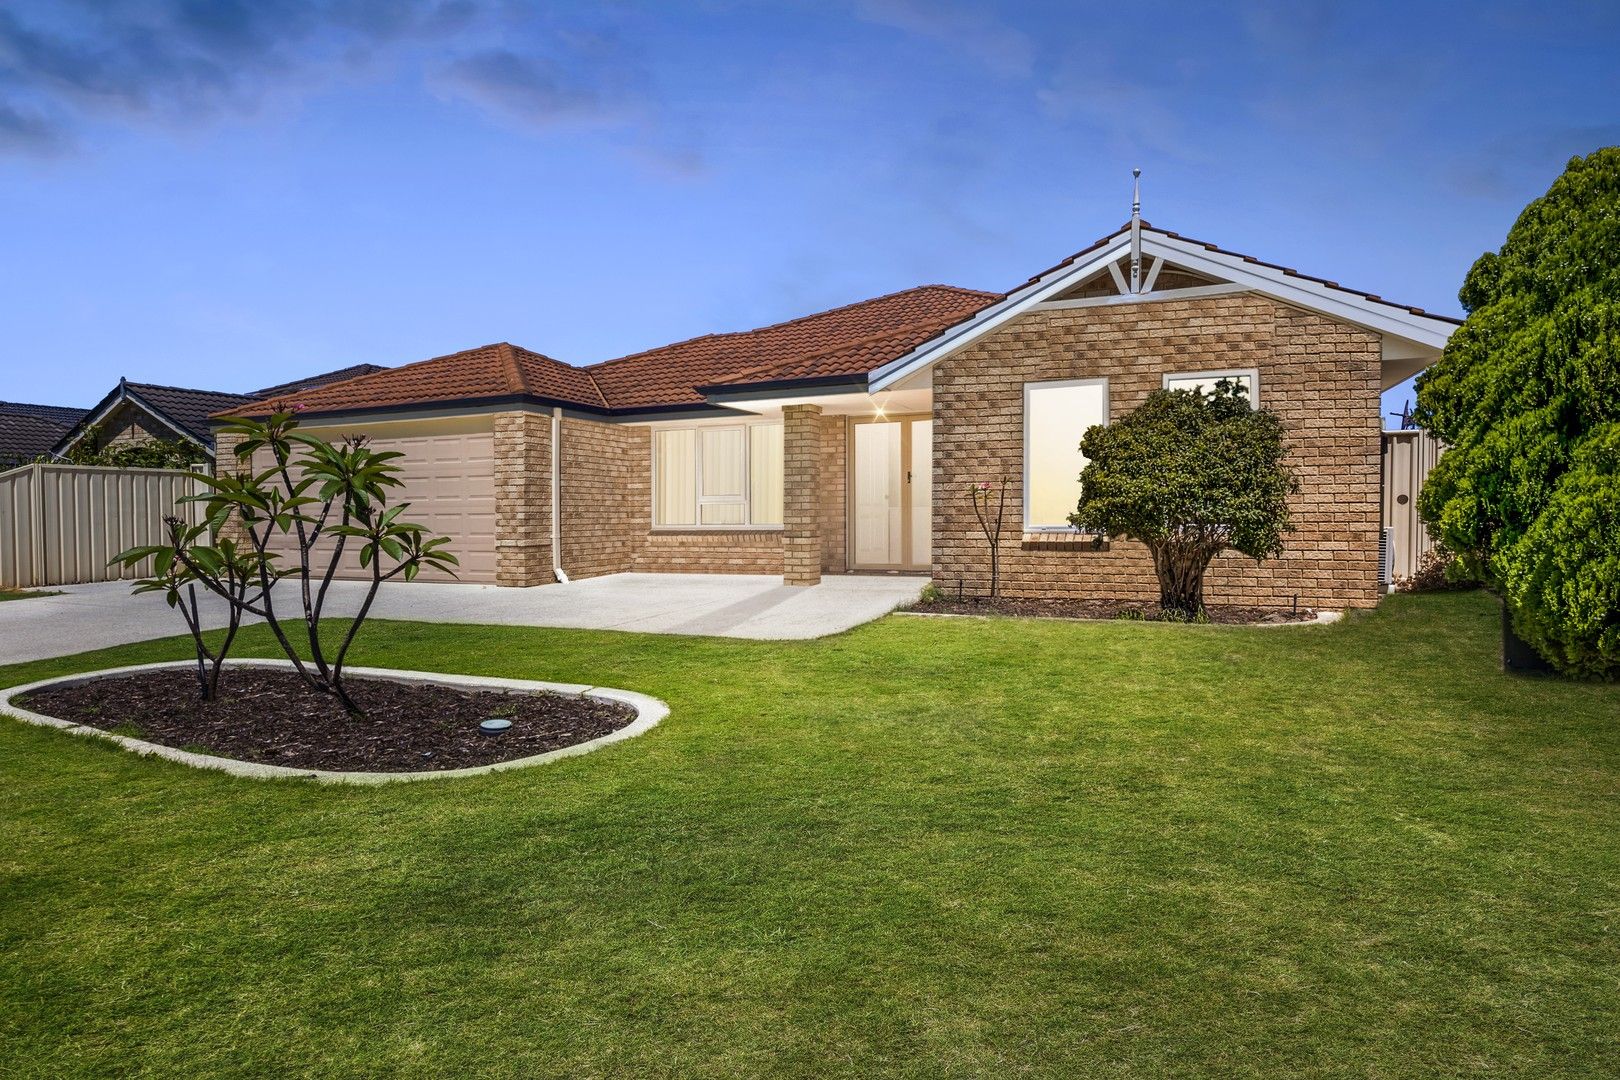 4 bedrooms House in 2 Diosma Way CANNING VALE WA, 6155